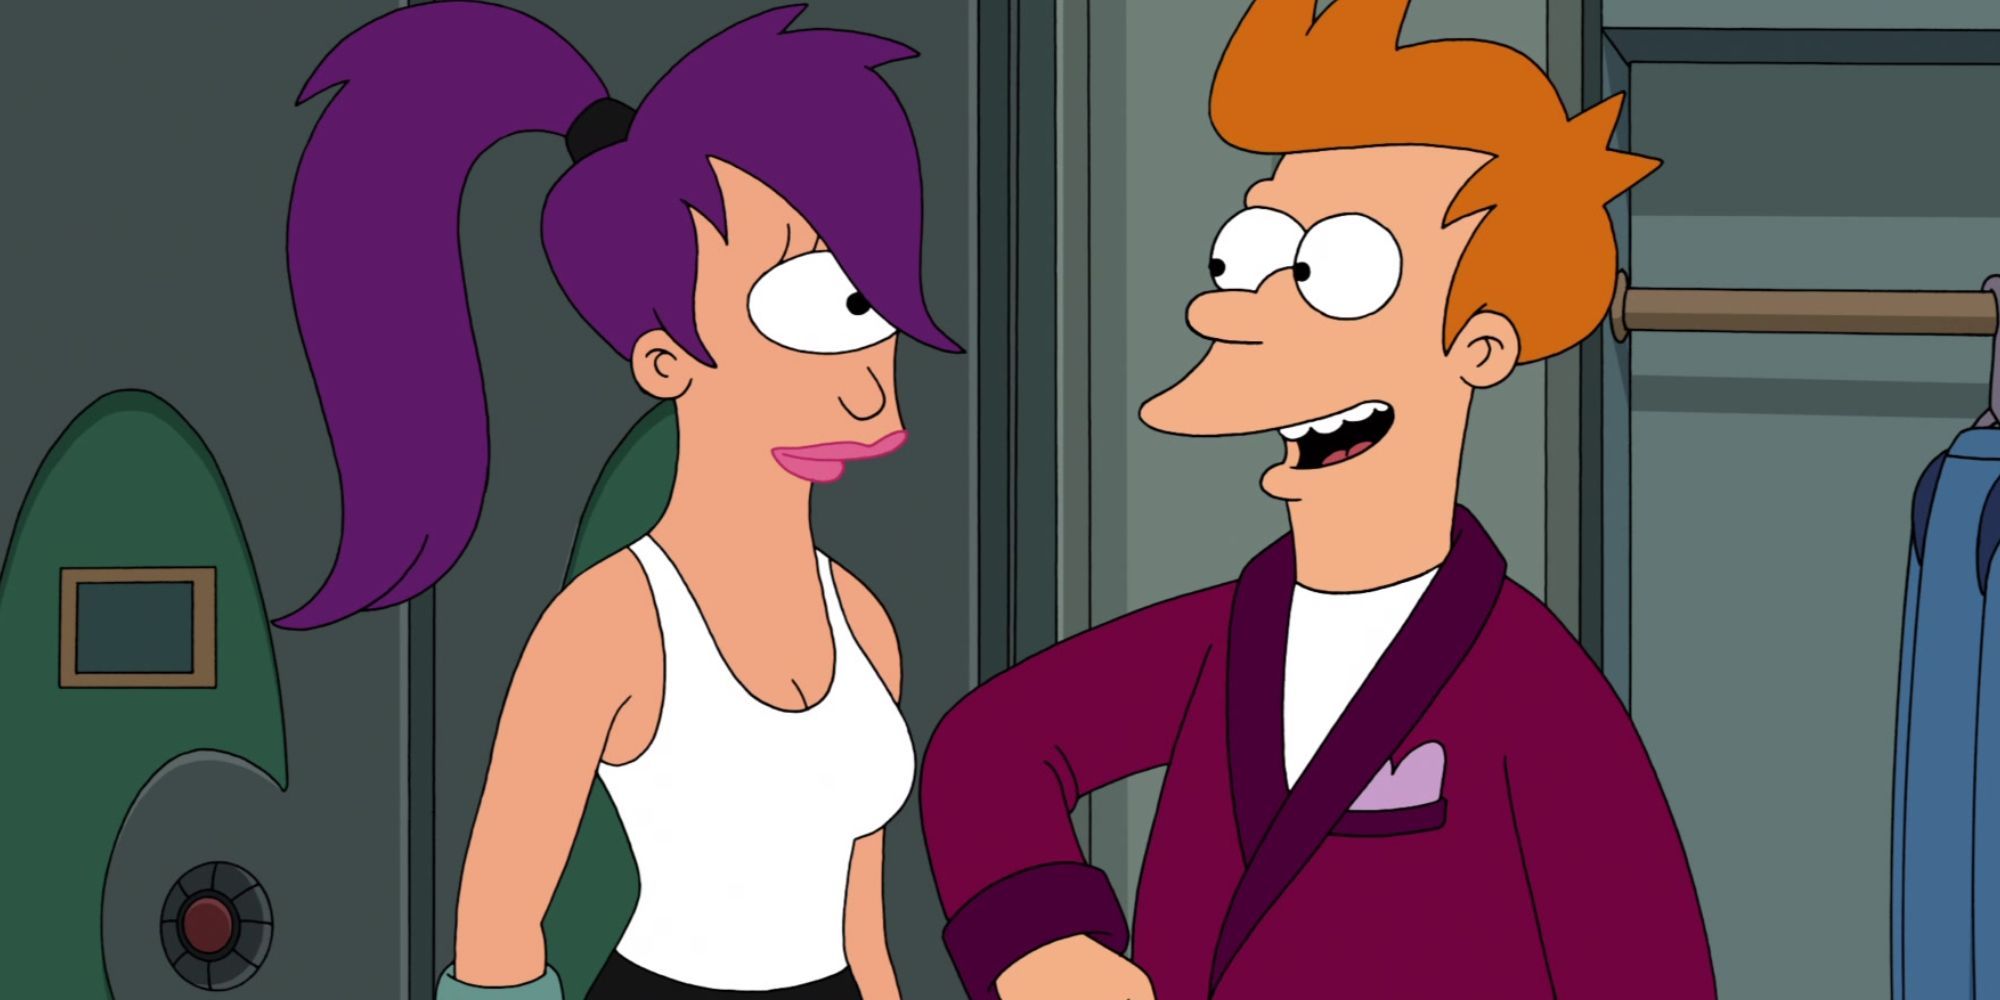 Fry smiling and offering his arm to Leela in Futurama